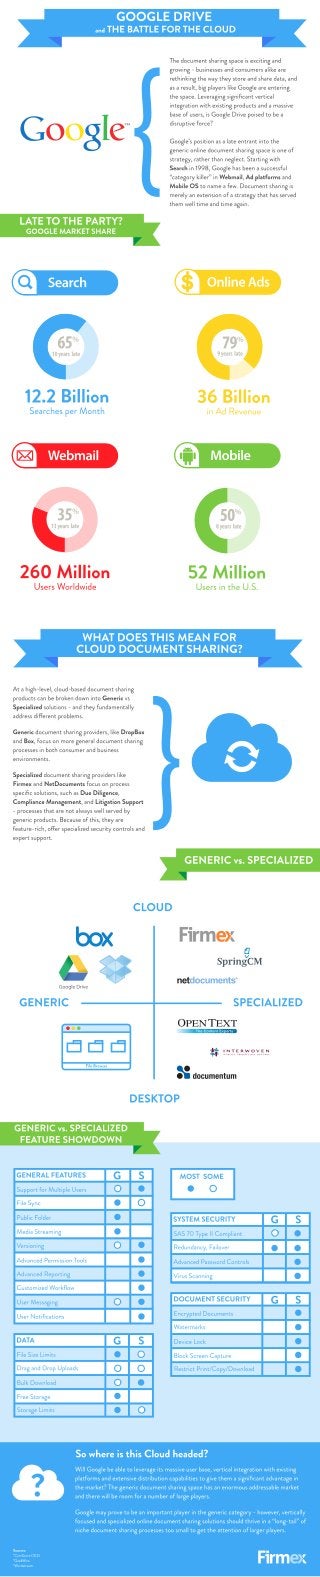 Generic vs. Specialized Document Sharing in the Cloud